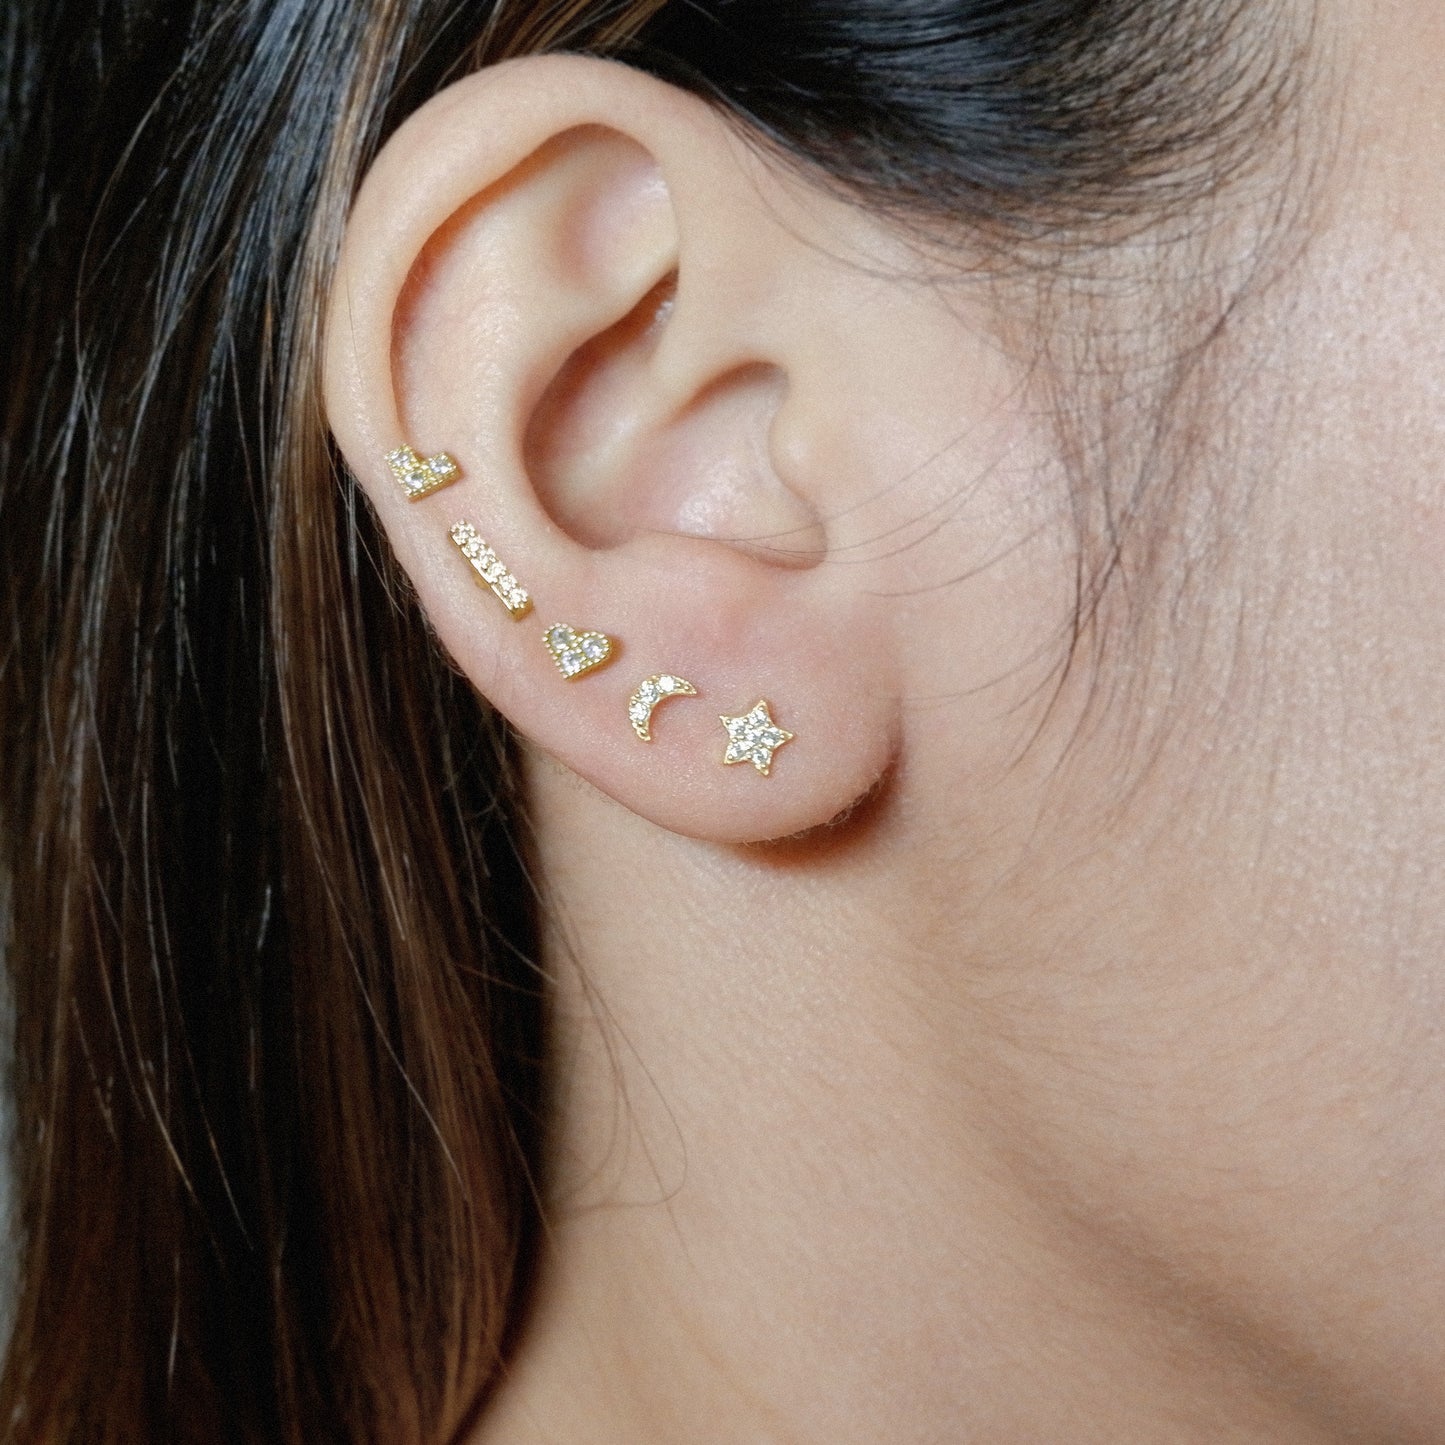 The Pave Moon Studs